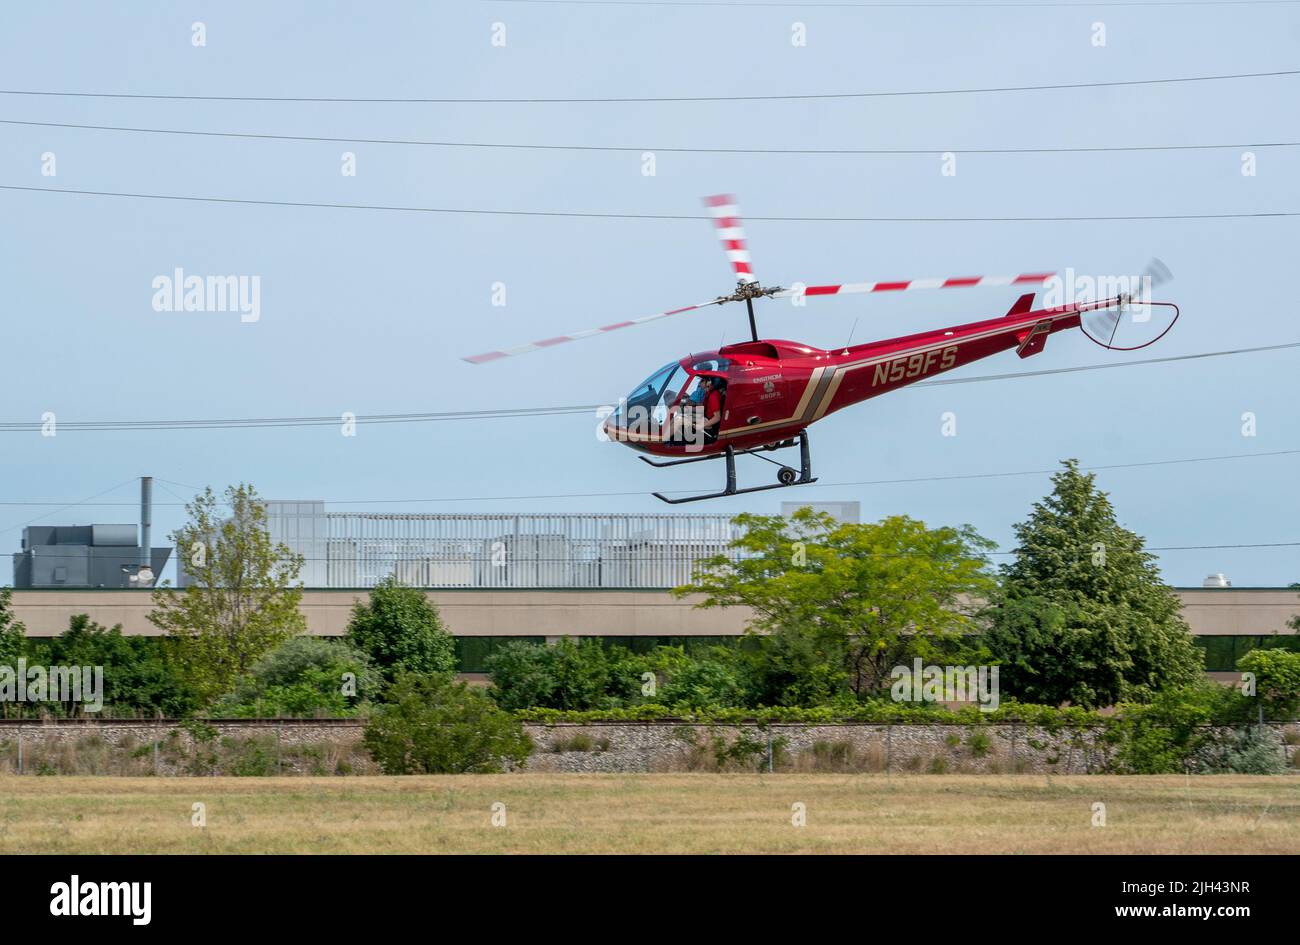 June 20, 2021 St Joseph MI USA; A red helicopter banks air takes off with a passenger during an air show event in Michigan Stock Photo